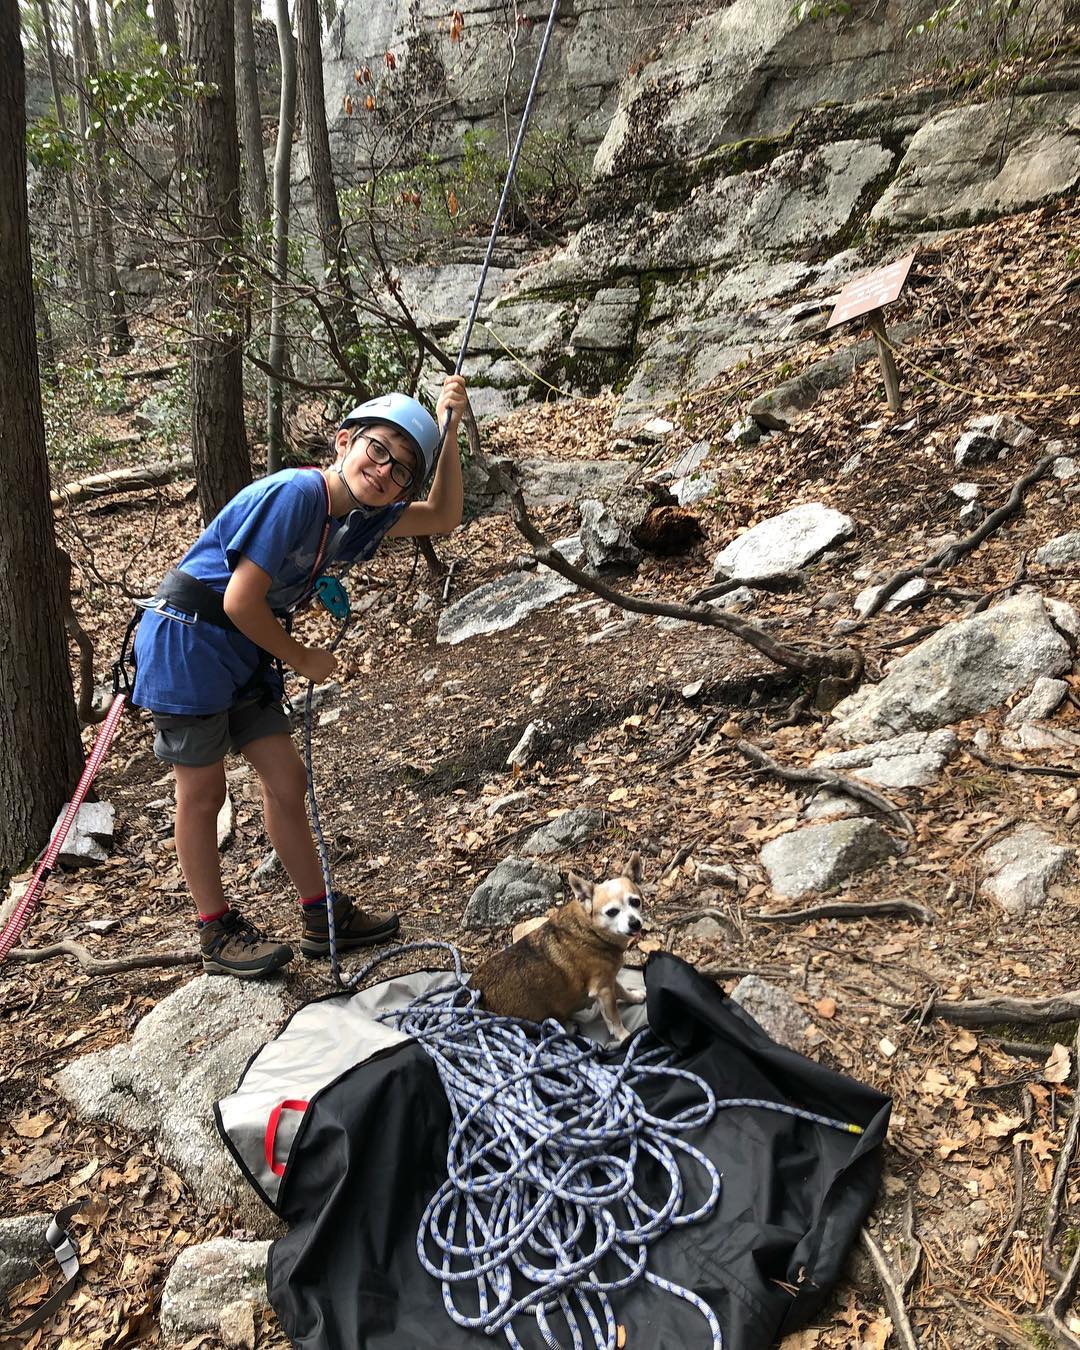 James Badgely's half-brother Cassius Riley went climbing in 2019.